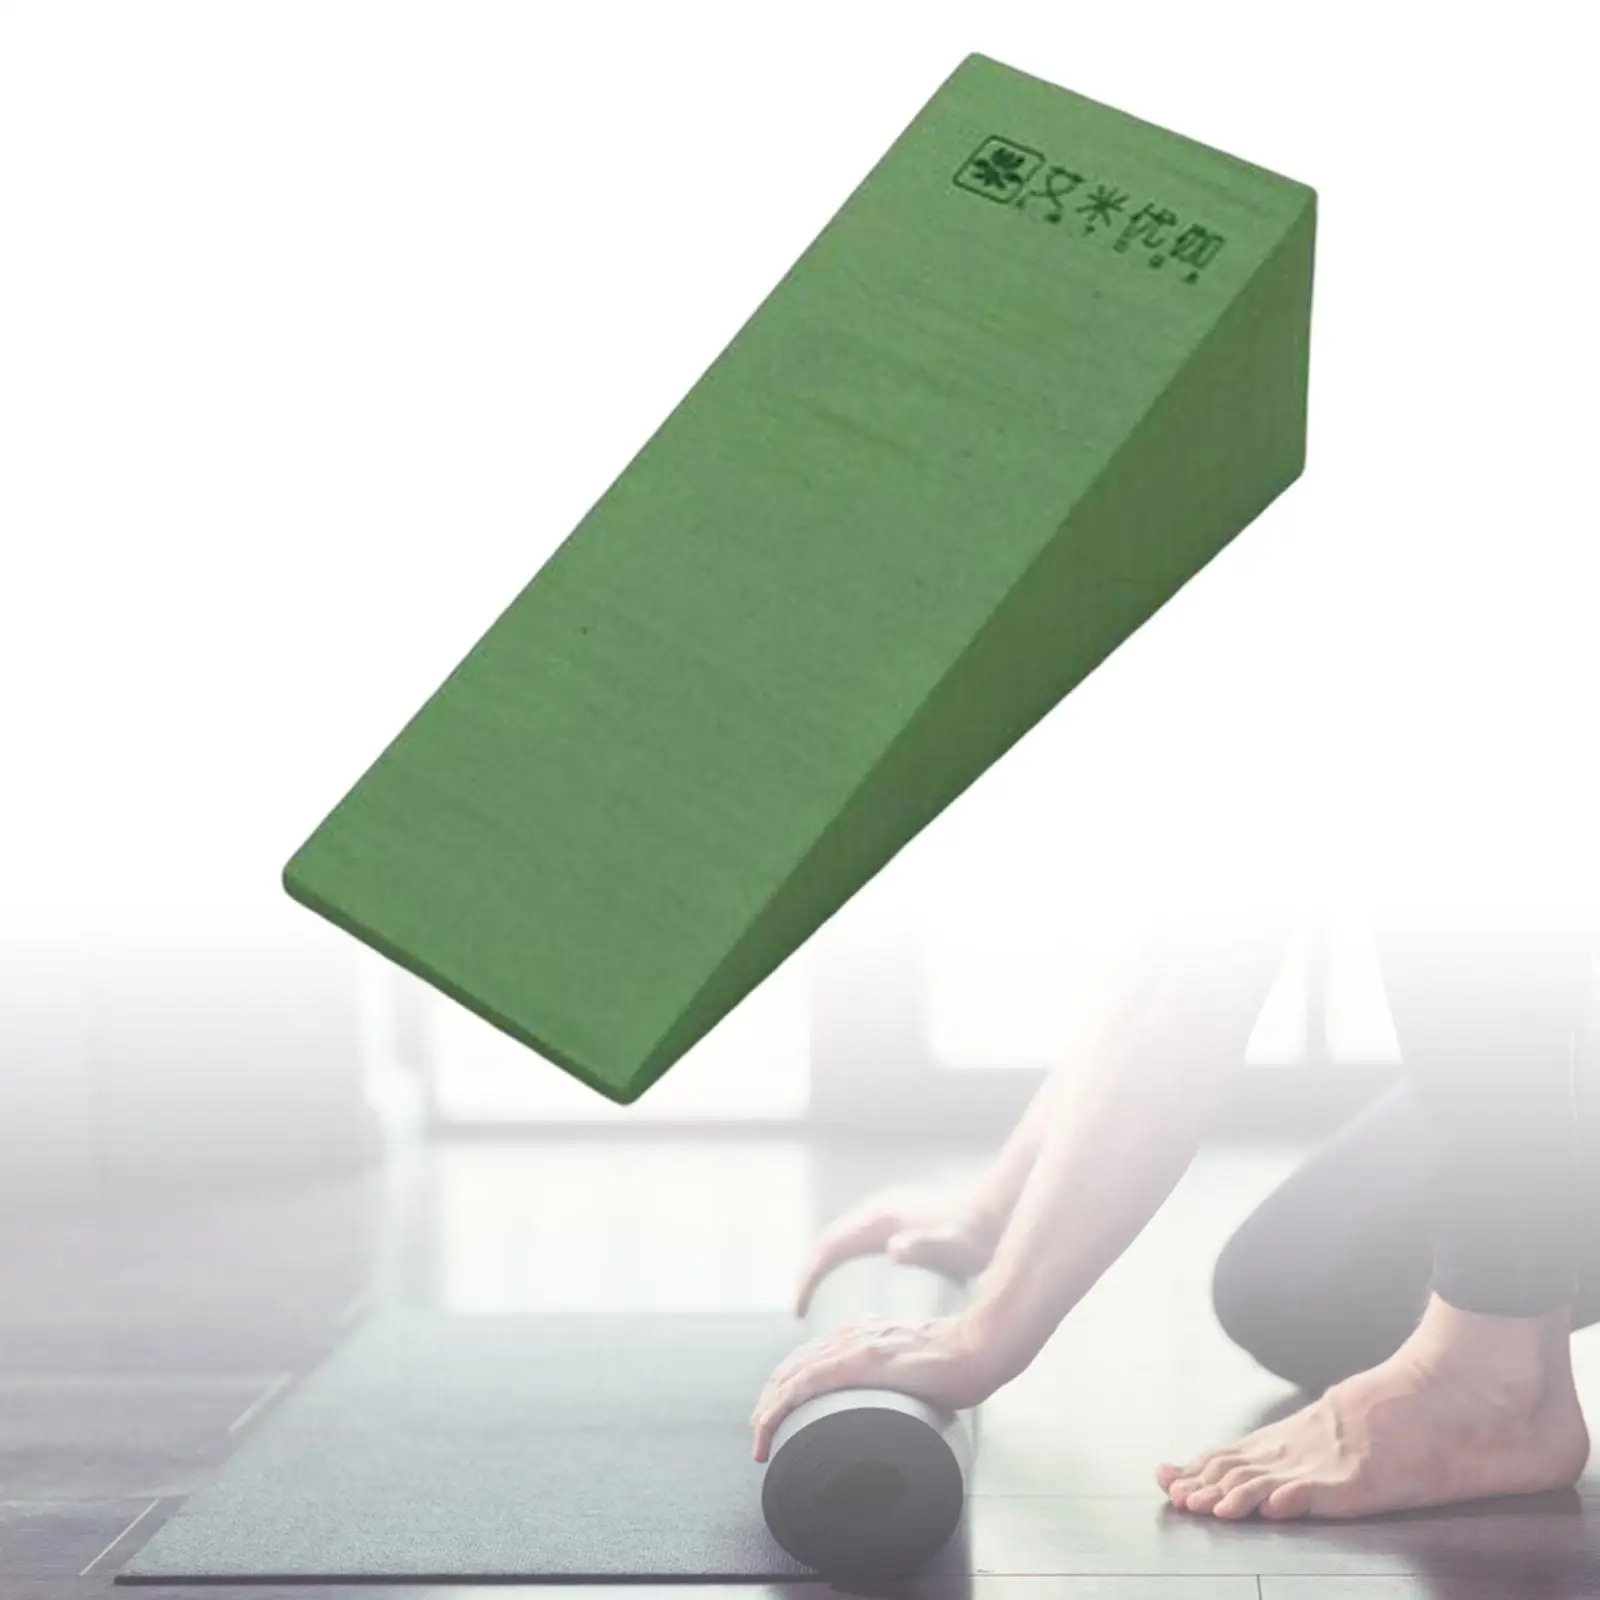 Yoga Blocks Accessories Supportive Balance Wrist Wedge Knee Pad Fitness Slant Board Wedge Blocks for Gym Pilates Stretching